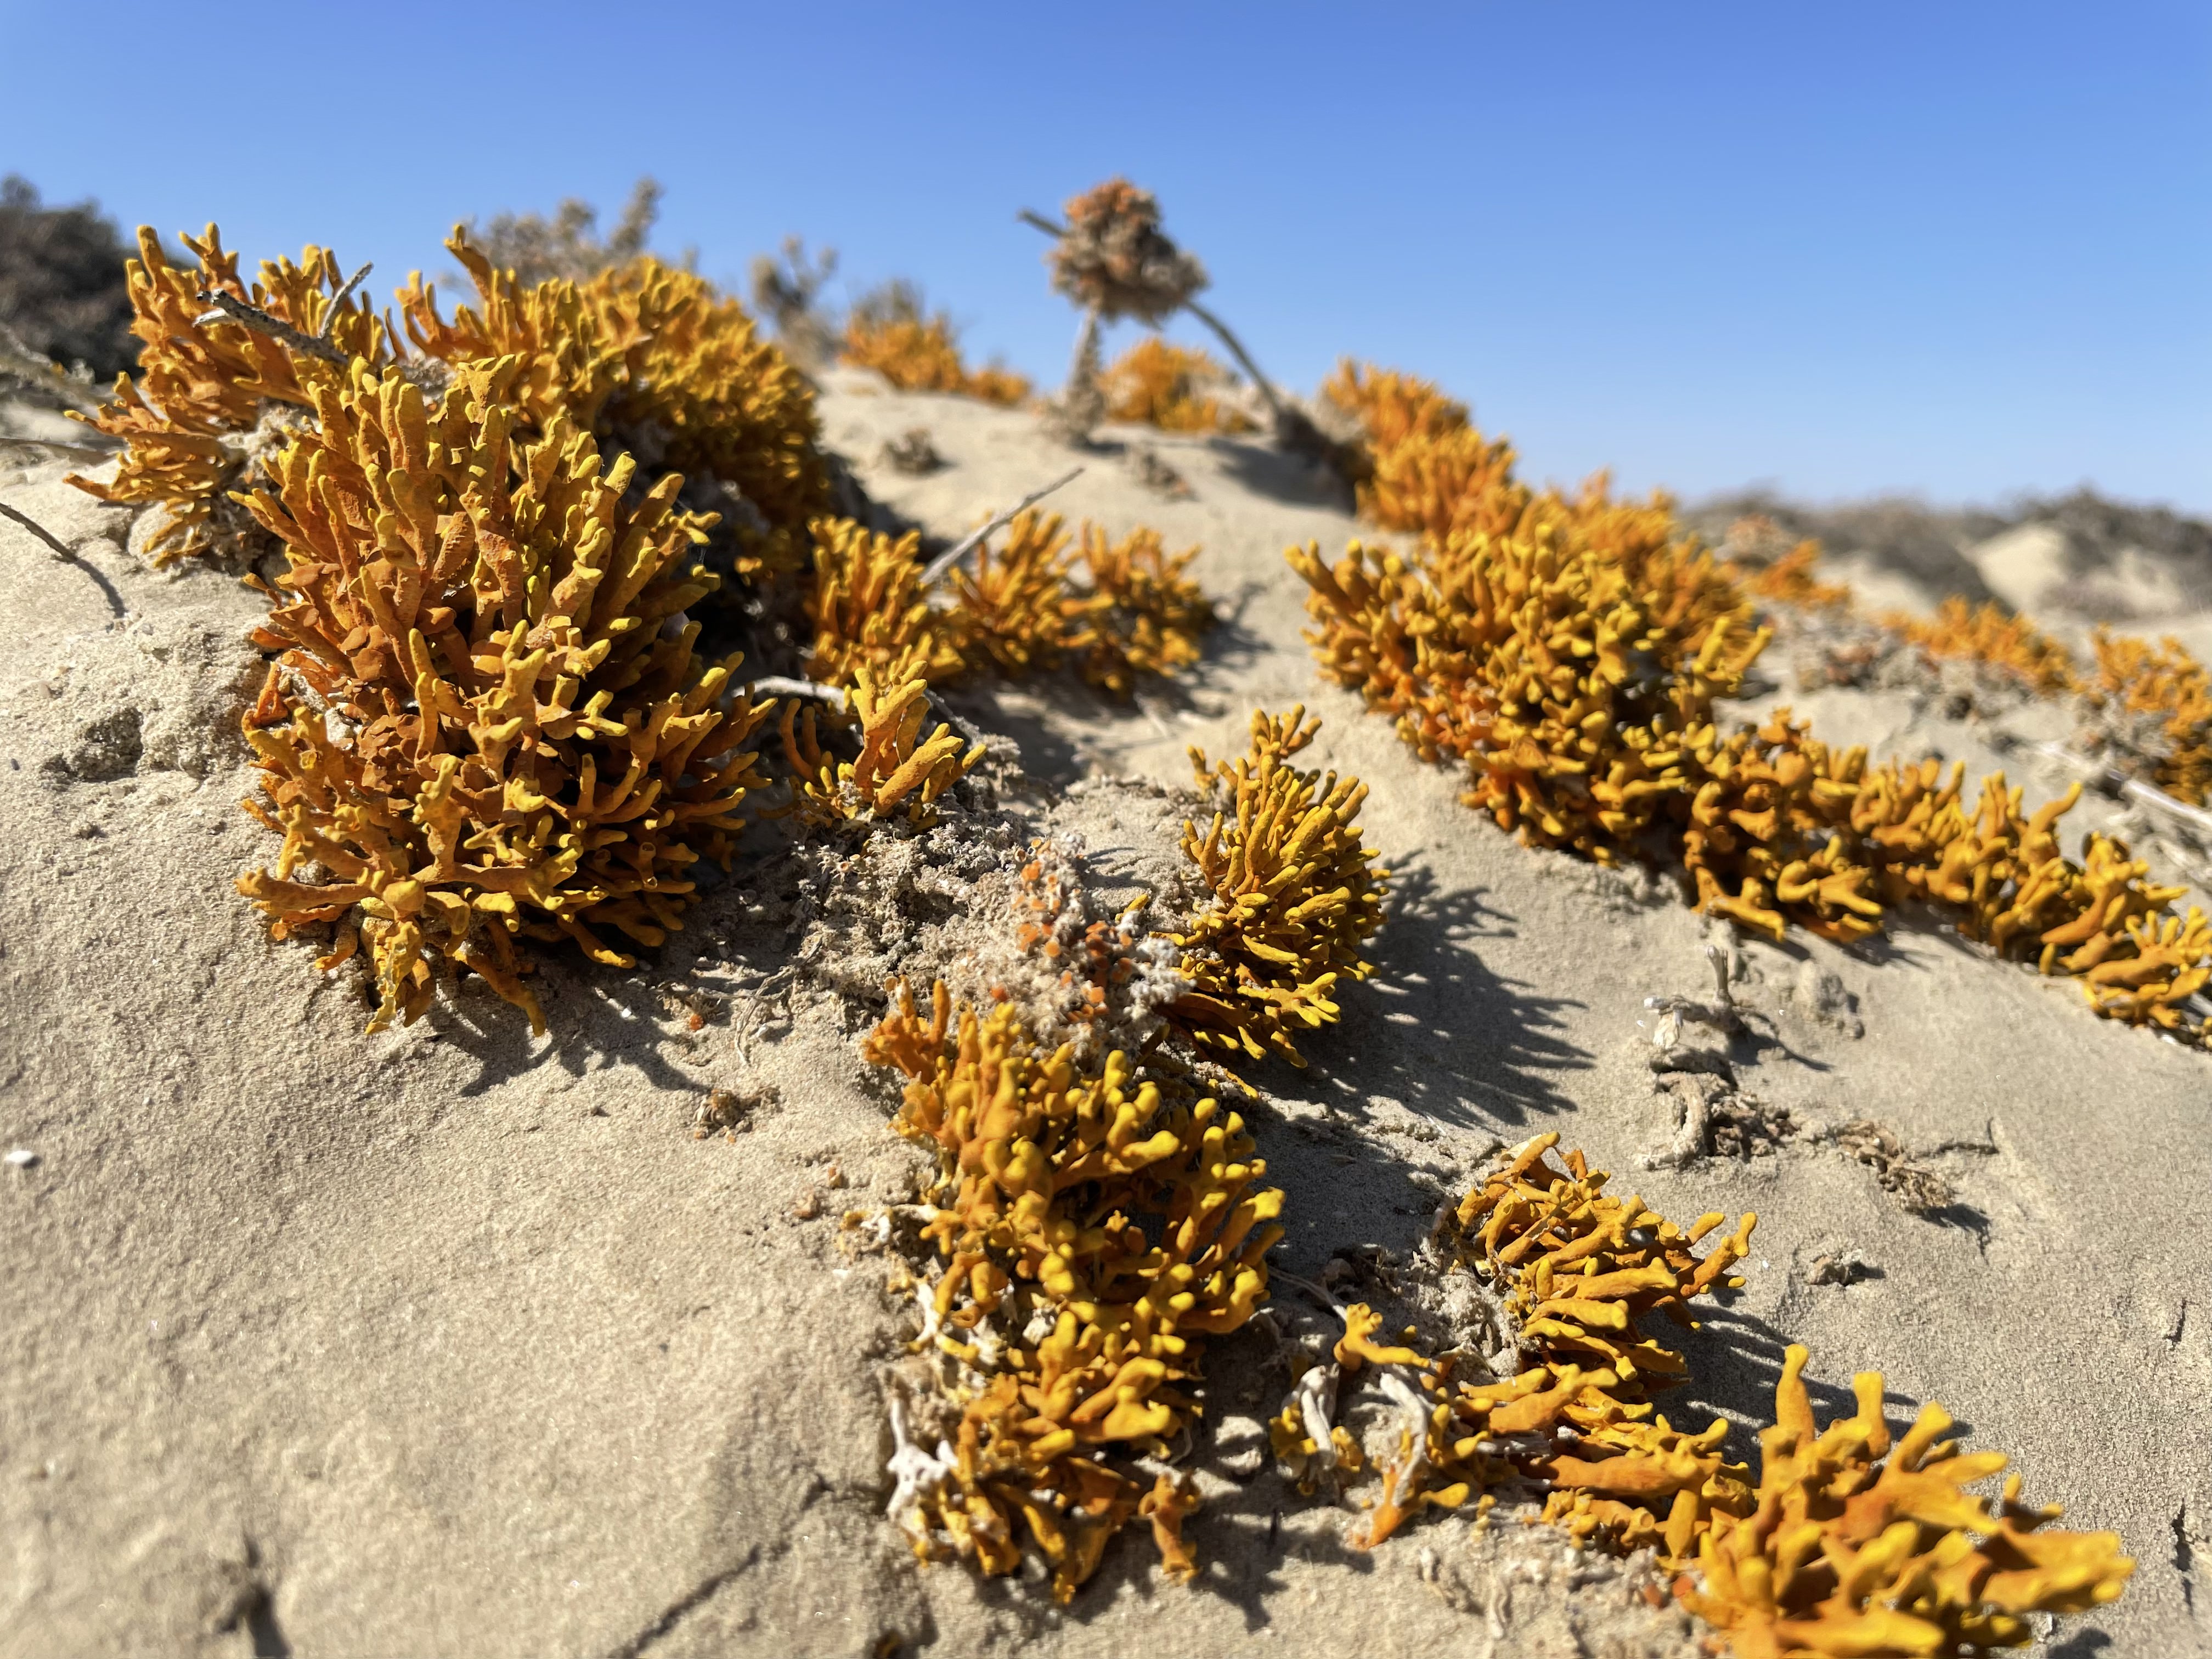 Clumps of lichen growing on a sand dune